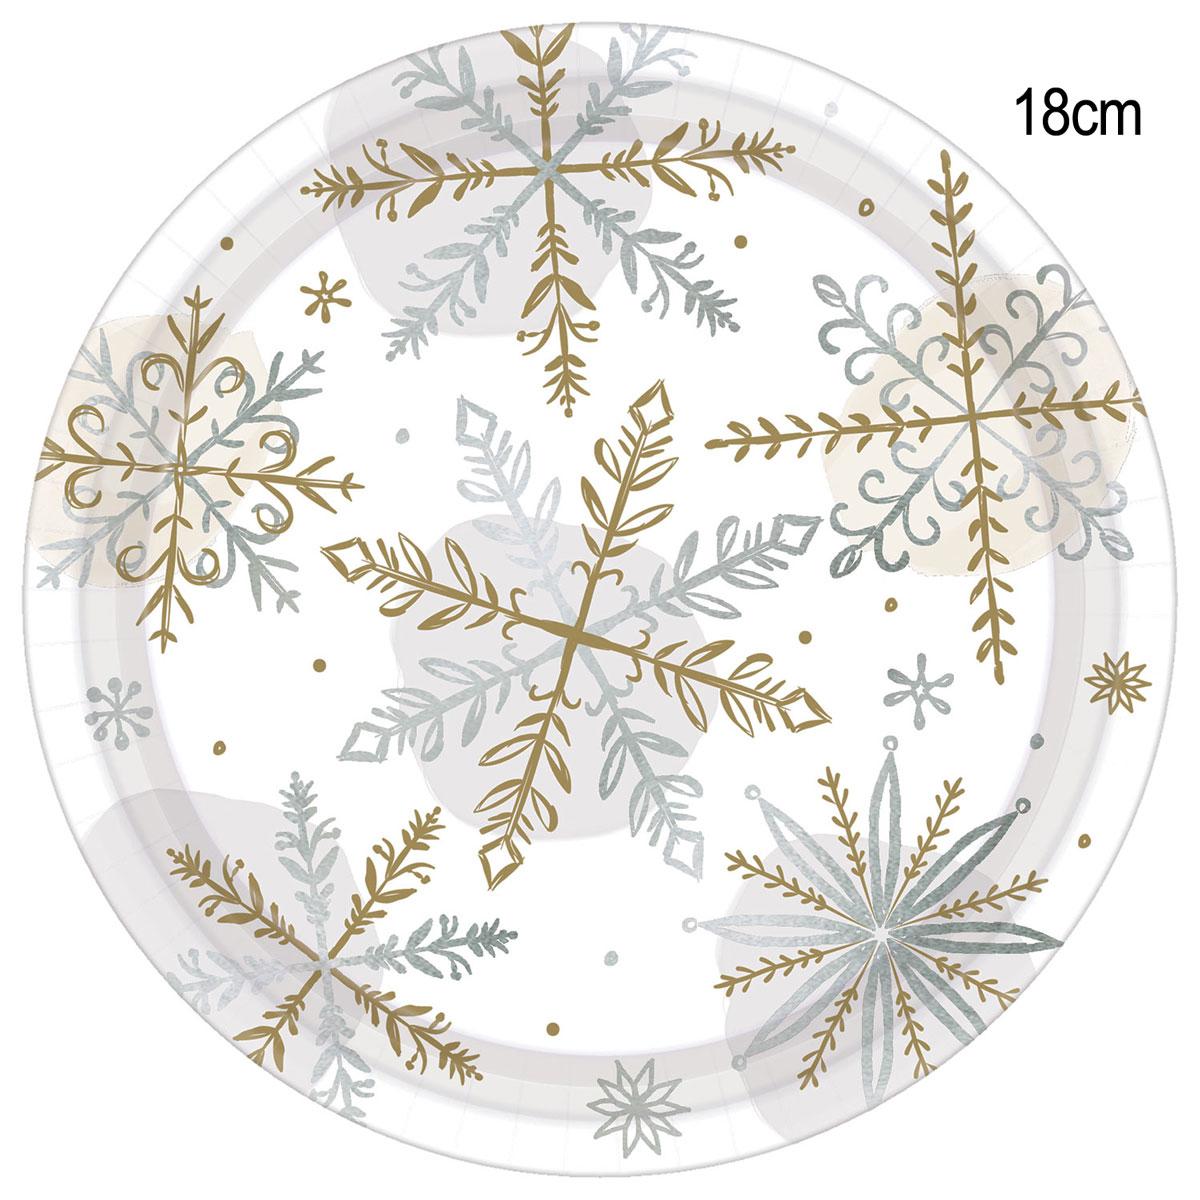 Shining Snow Paper Plates 18cm pk8 by Amscan 542174 available from a range here at Karnival Costumes online party shop